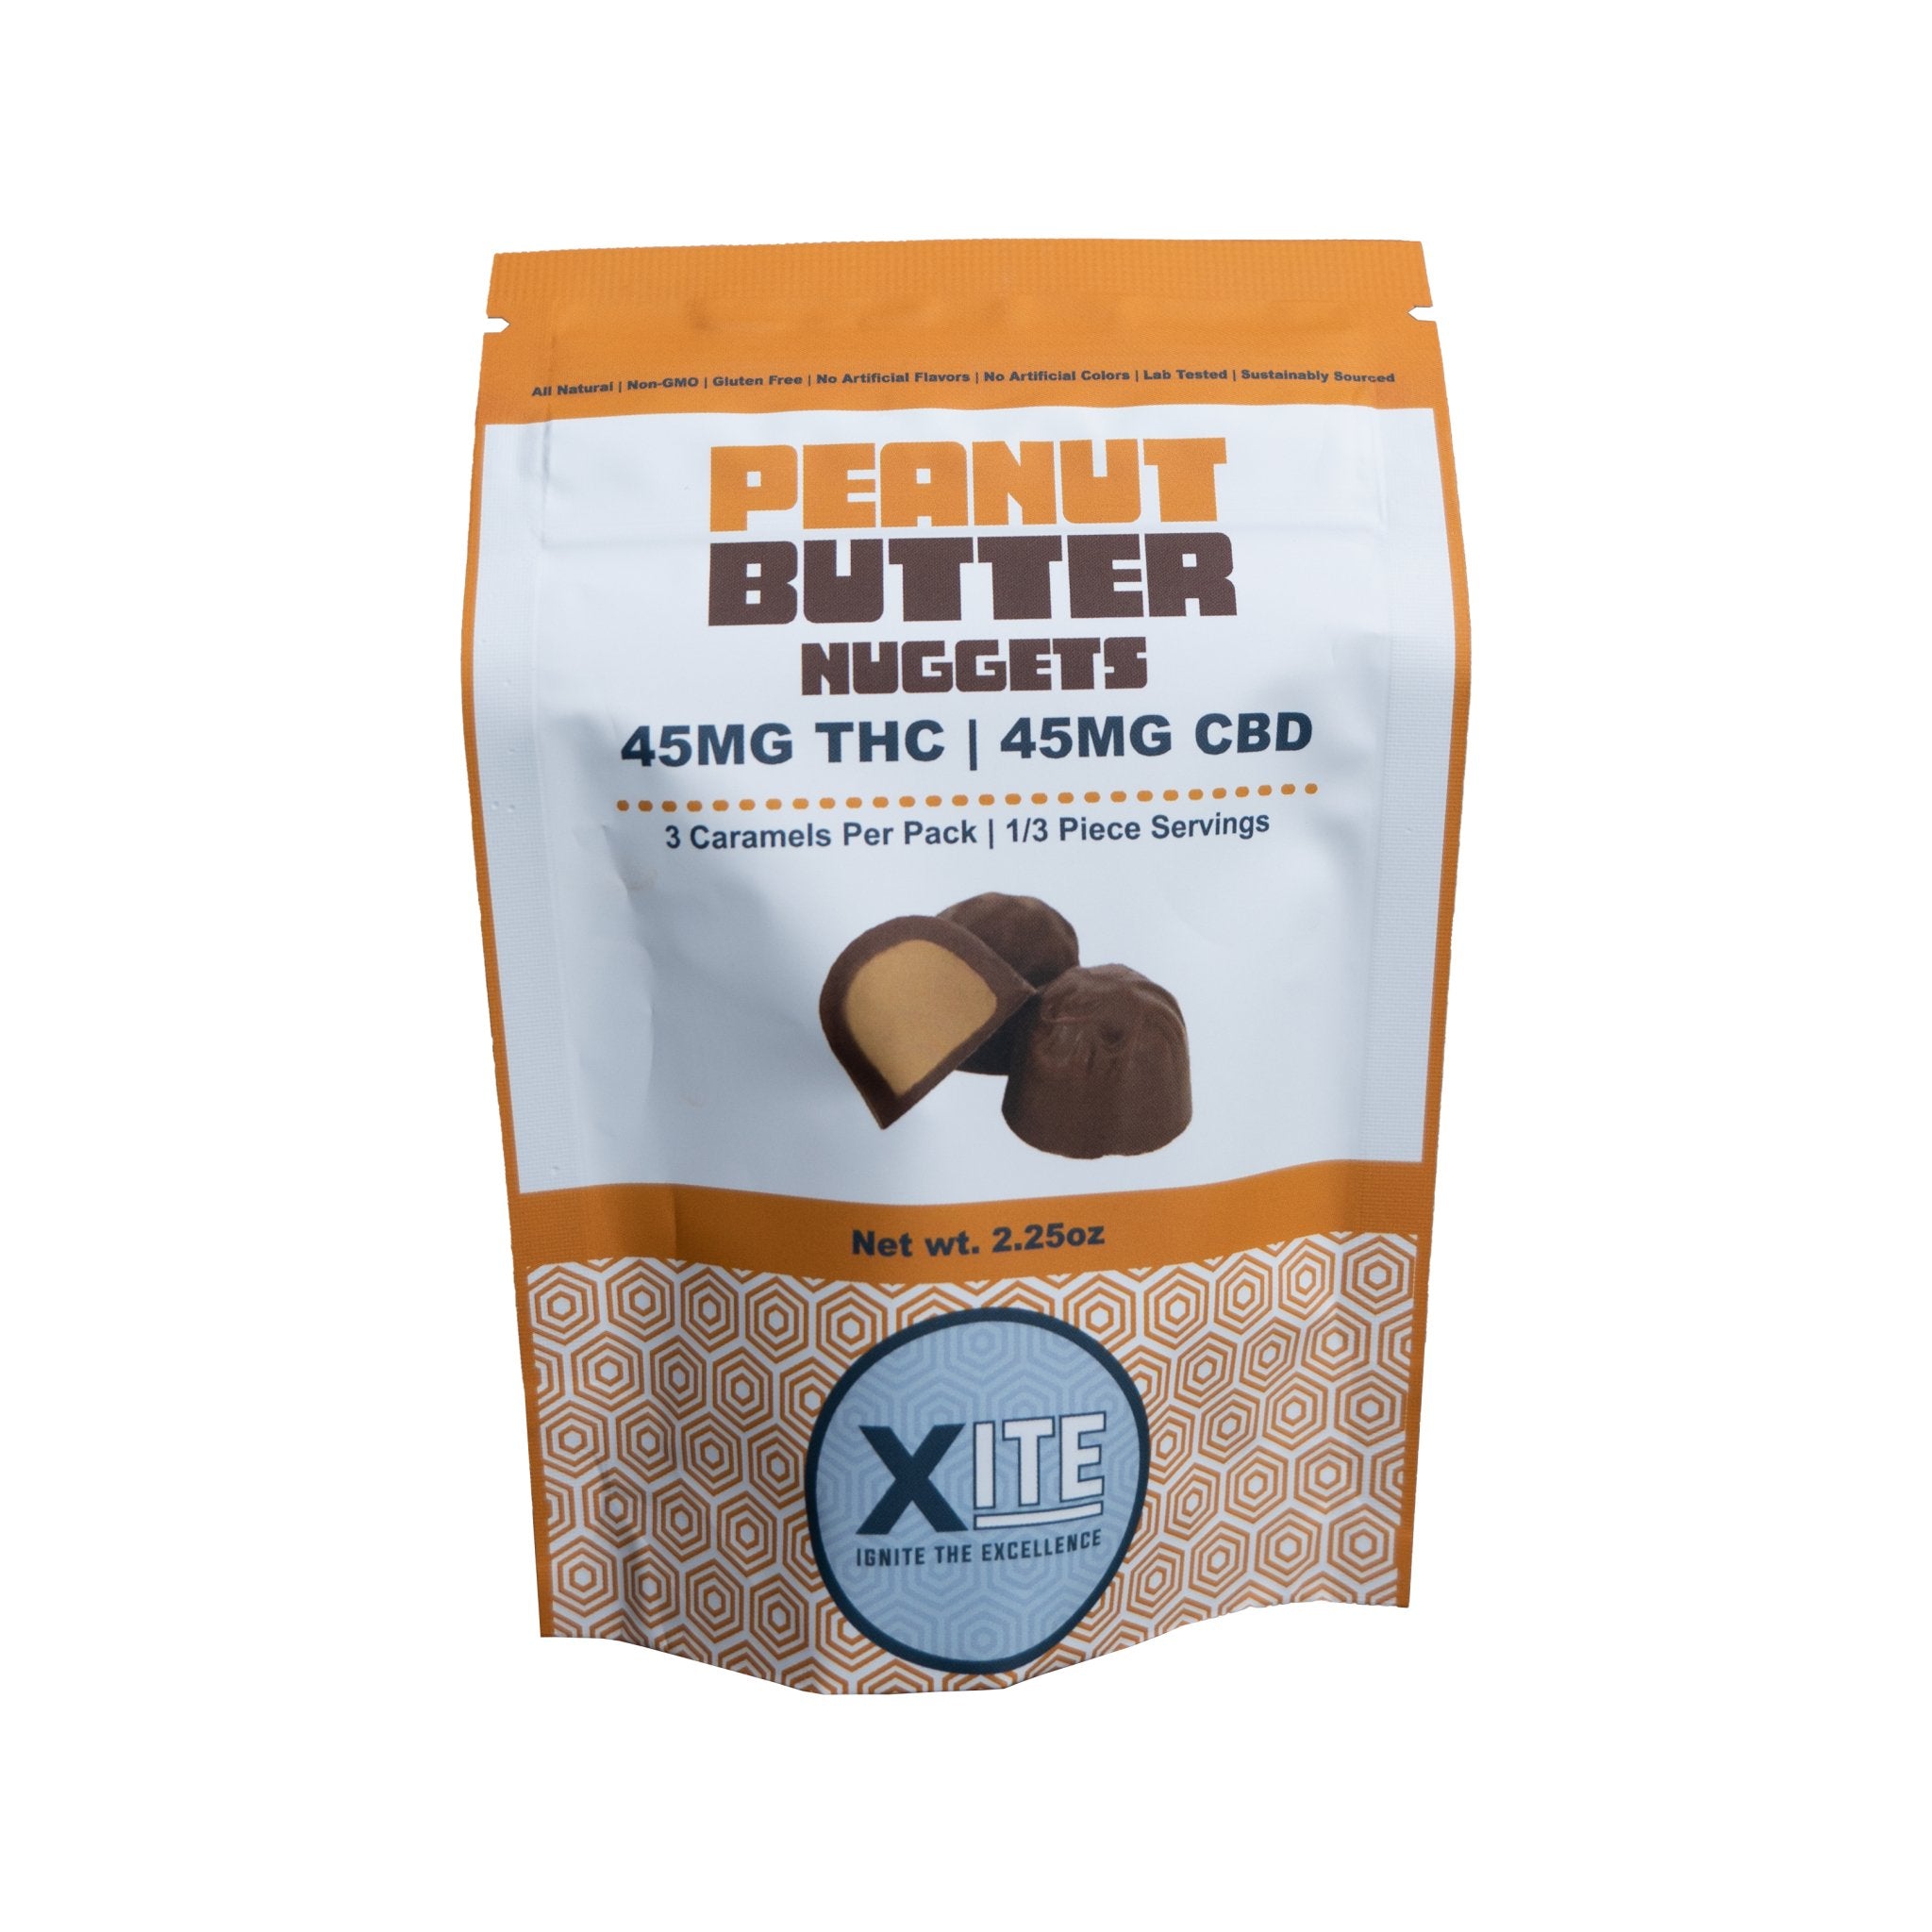 XITE Chocolate Peanut Butter Nuggets 45mg THC